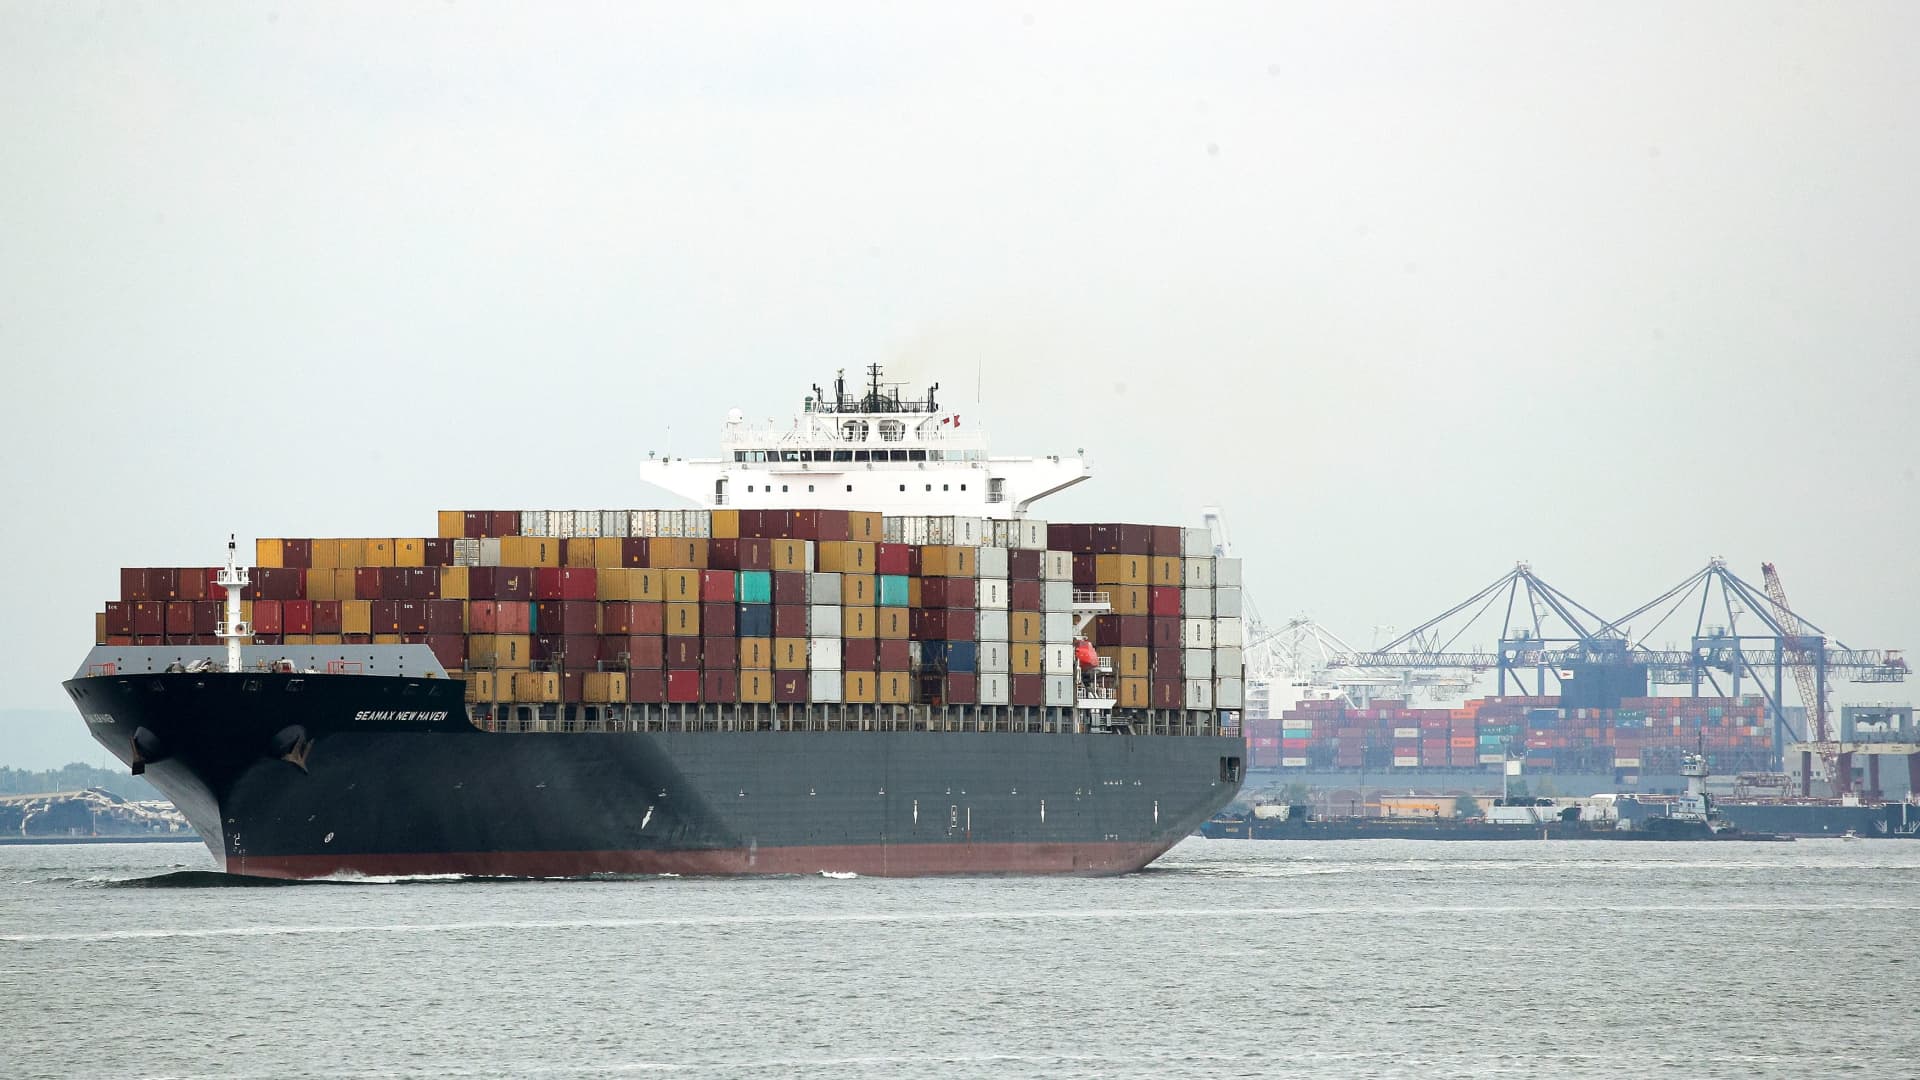 Containers are stacked on the deck of cargo ship Seamax New Haven as it is under way in New York Harbor in New York City, U.S. October 13, 2021.